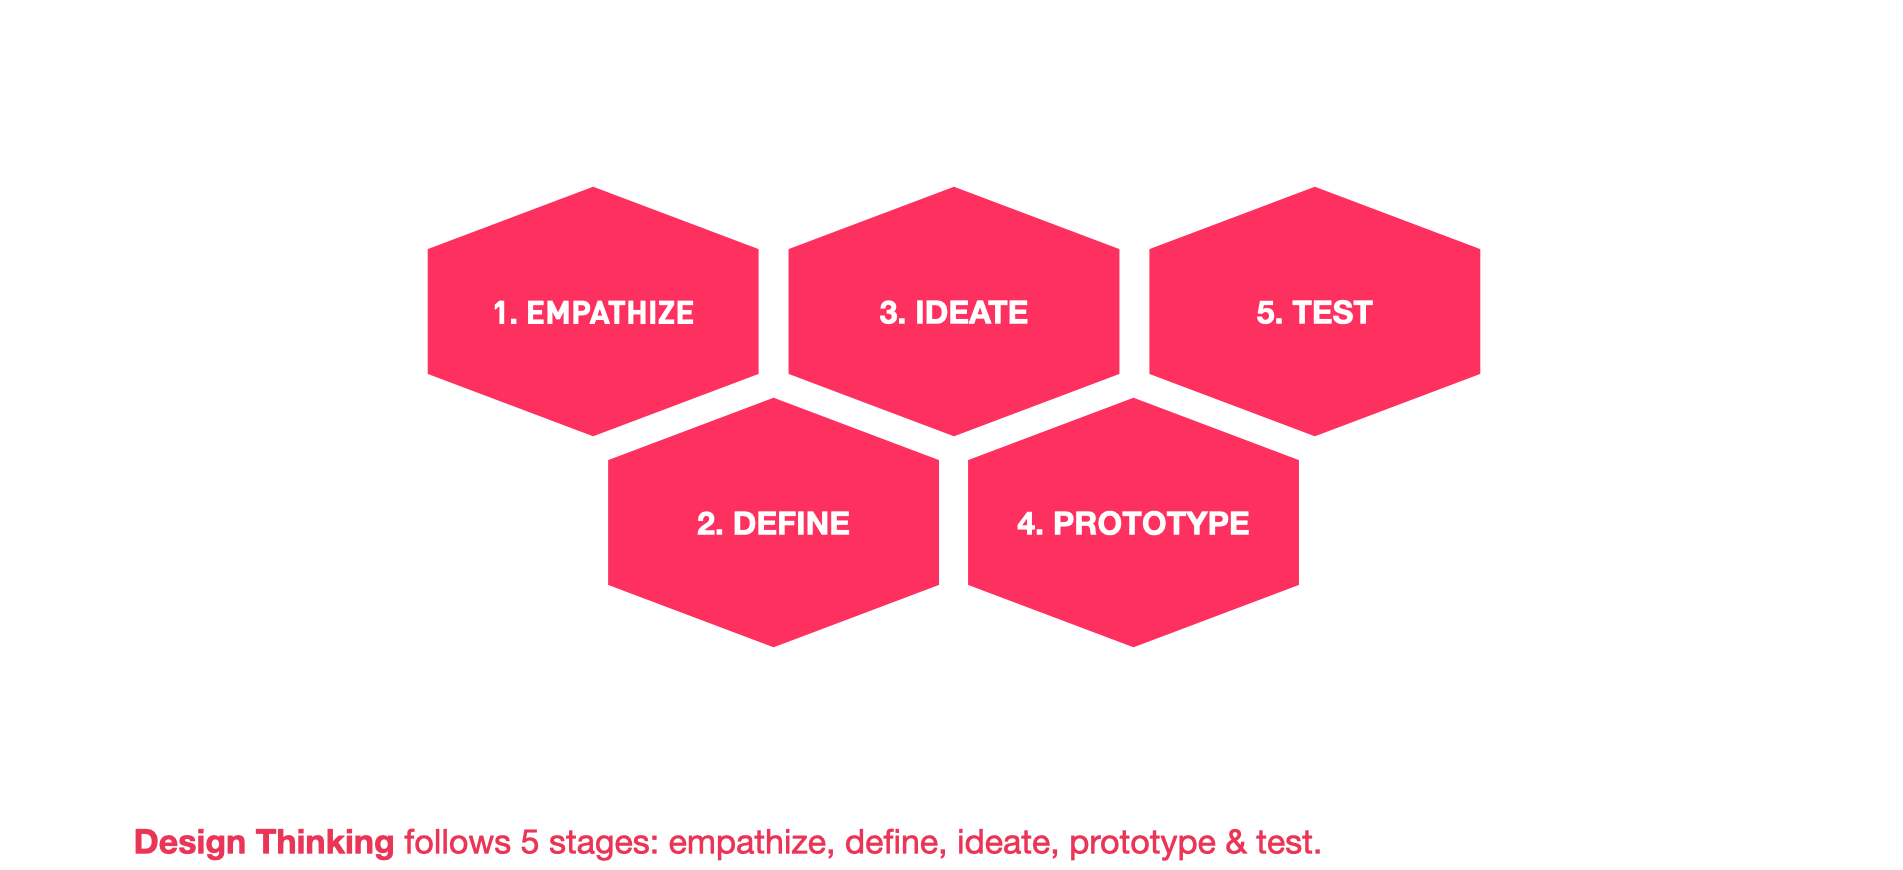 "5 stages of Design Thinking"